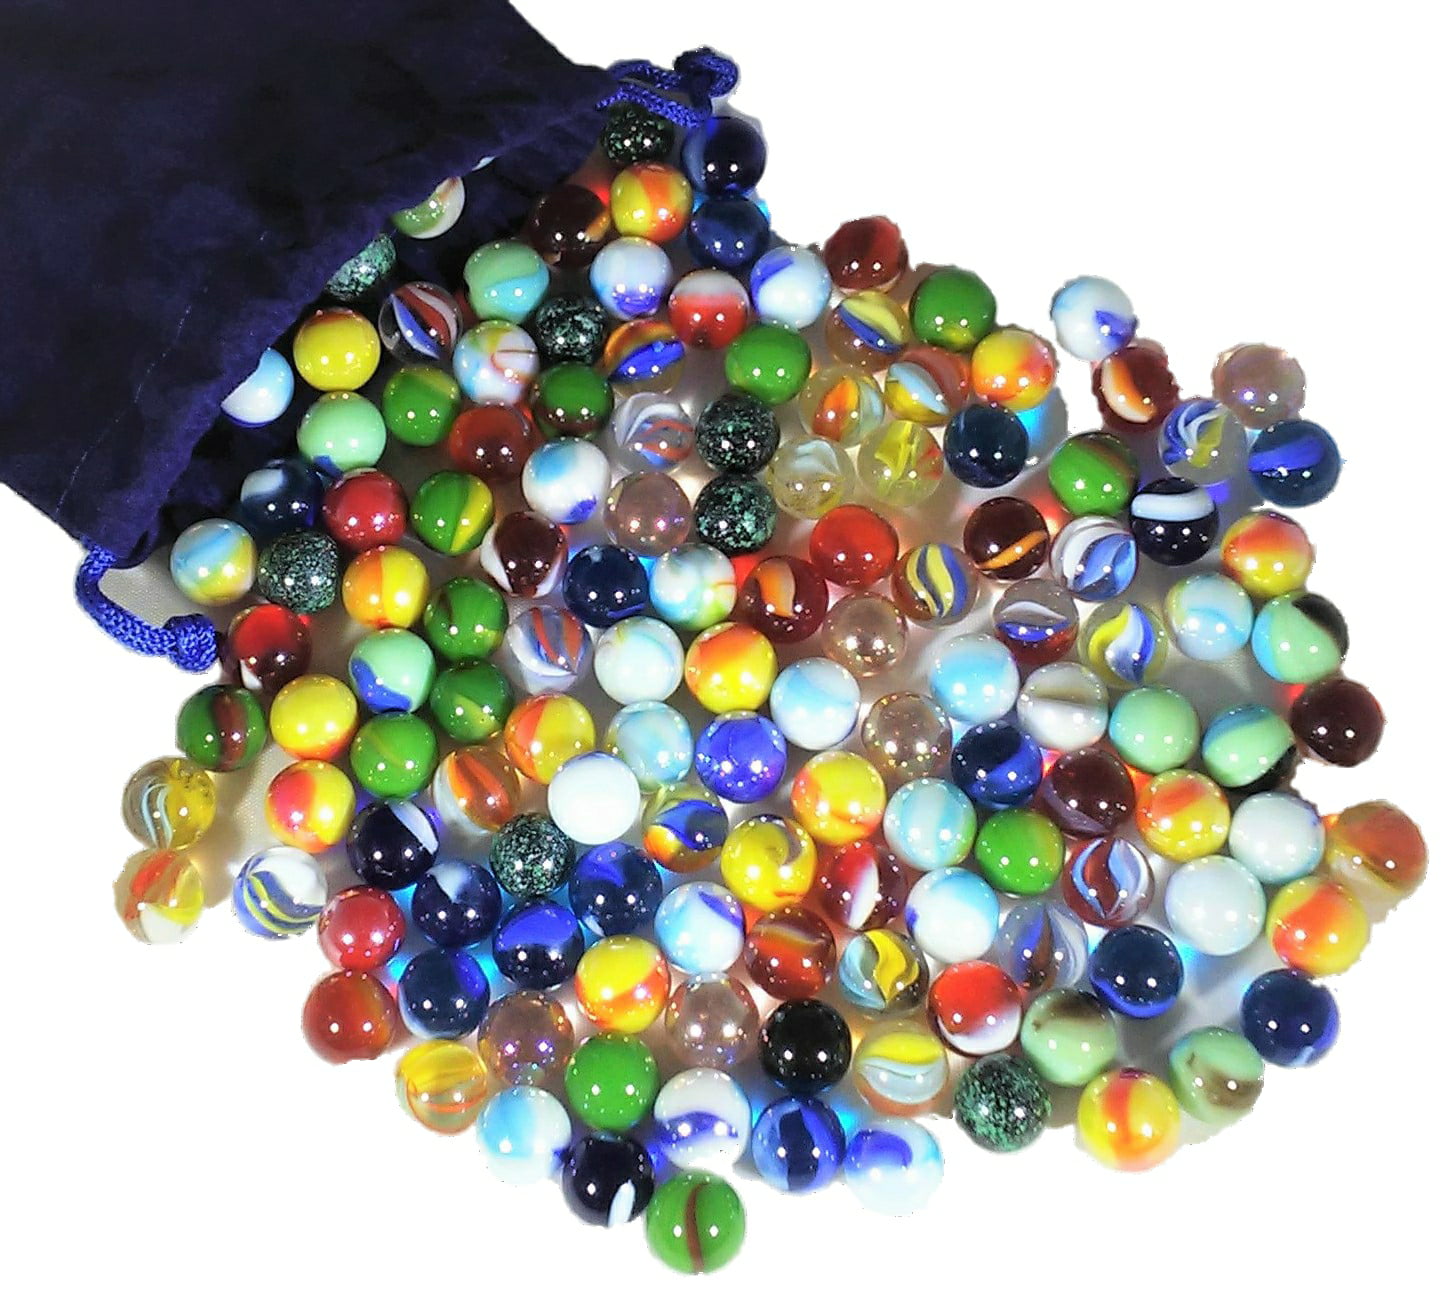 13mm / 1/2" OR SMALLER 10 x TIDAL WAVE PeeWee Glass Marbles NEW 